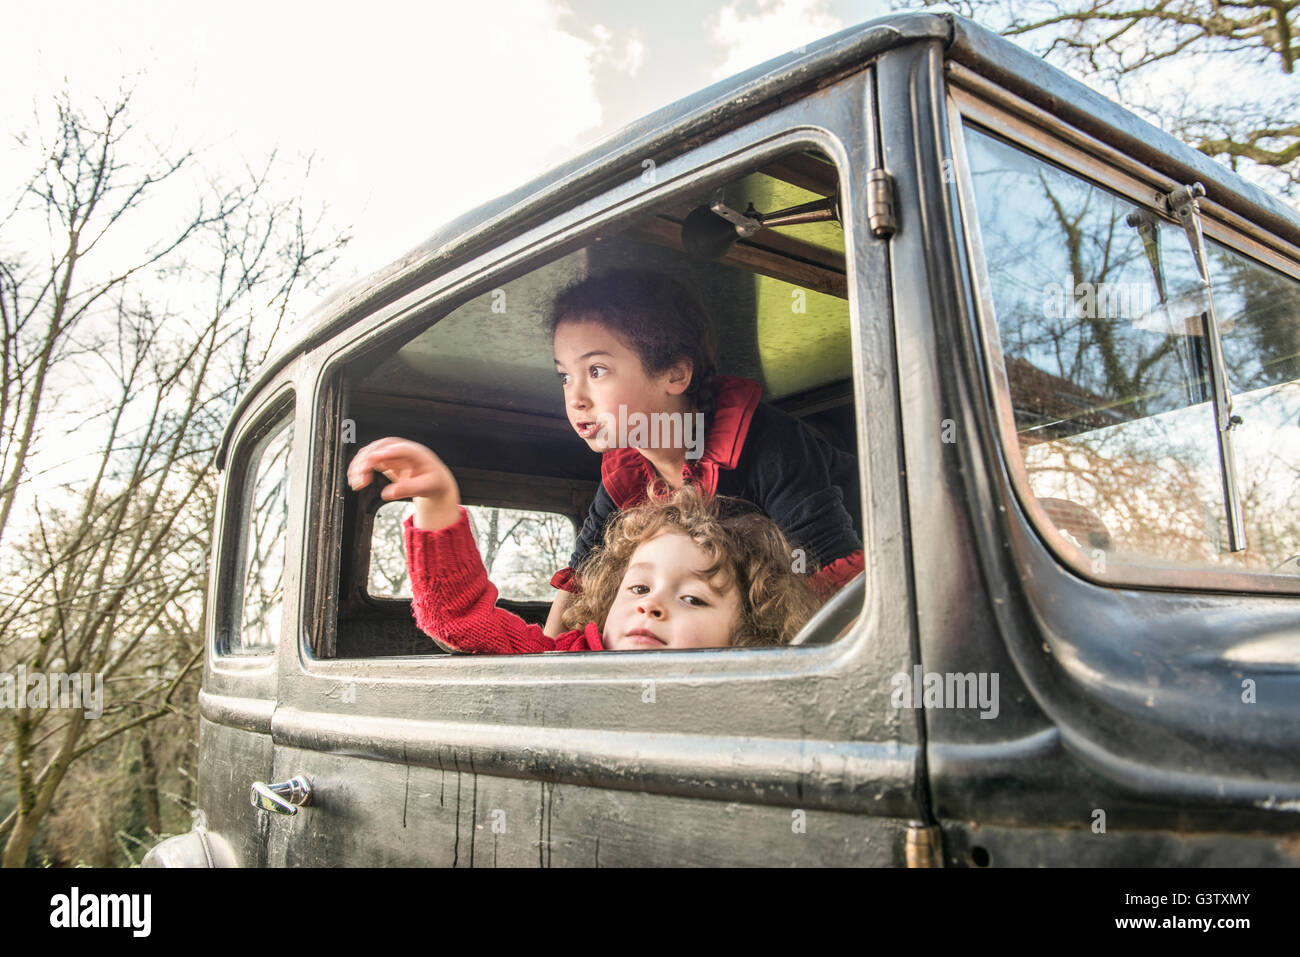 Two young children playing in a vintage car. Stock Photo